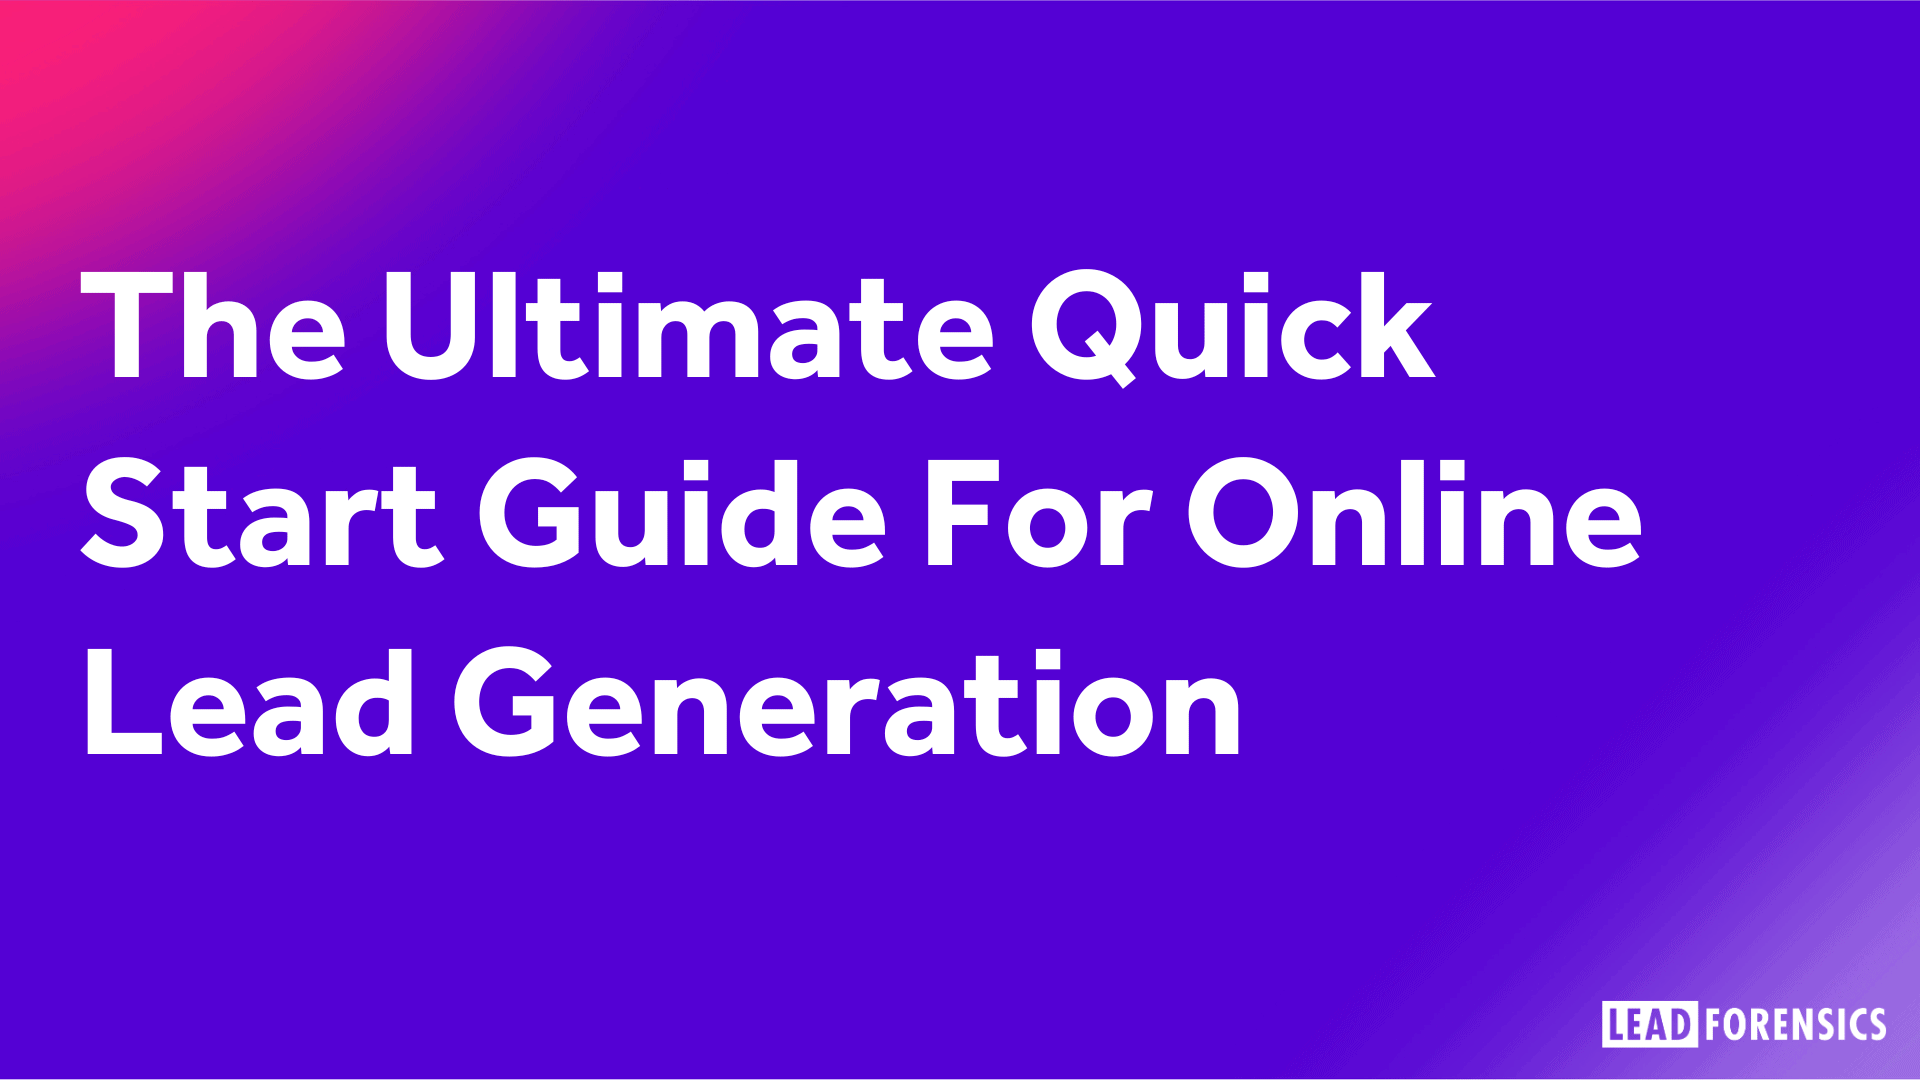 The Ultimate Quick Start Guide For Online Lead Generation